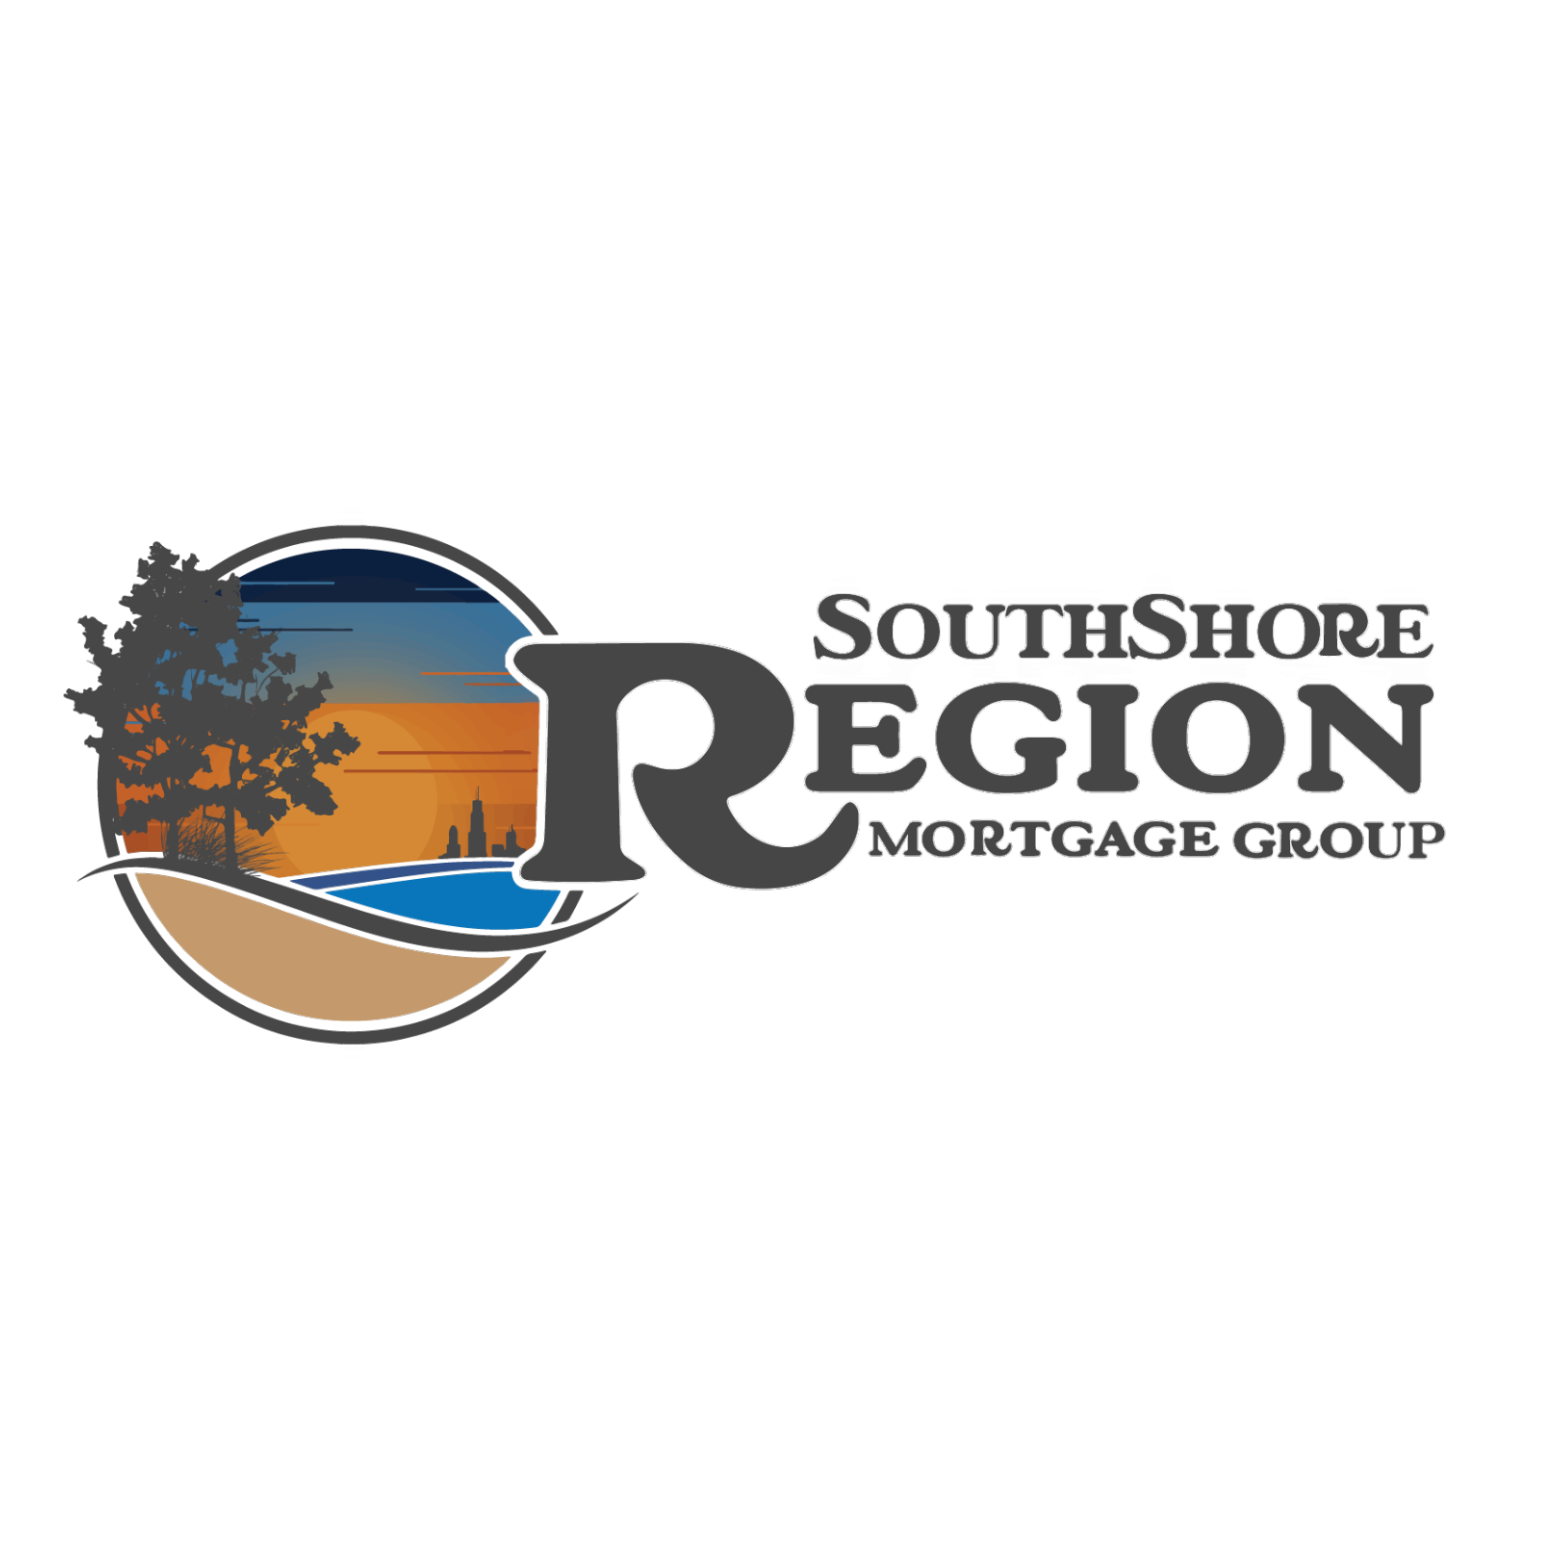 SouthShore Region Mortgage Group Refinance | Get Low Mortgage Rates